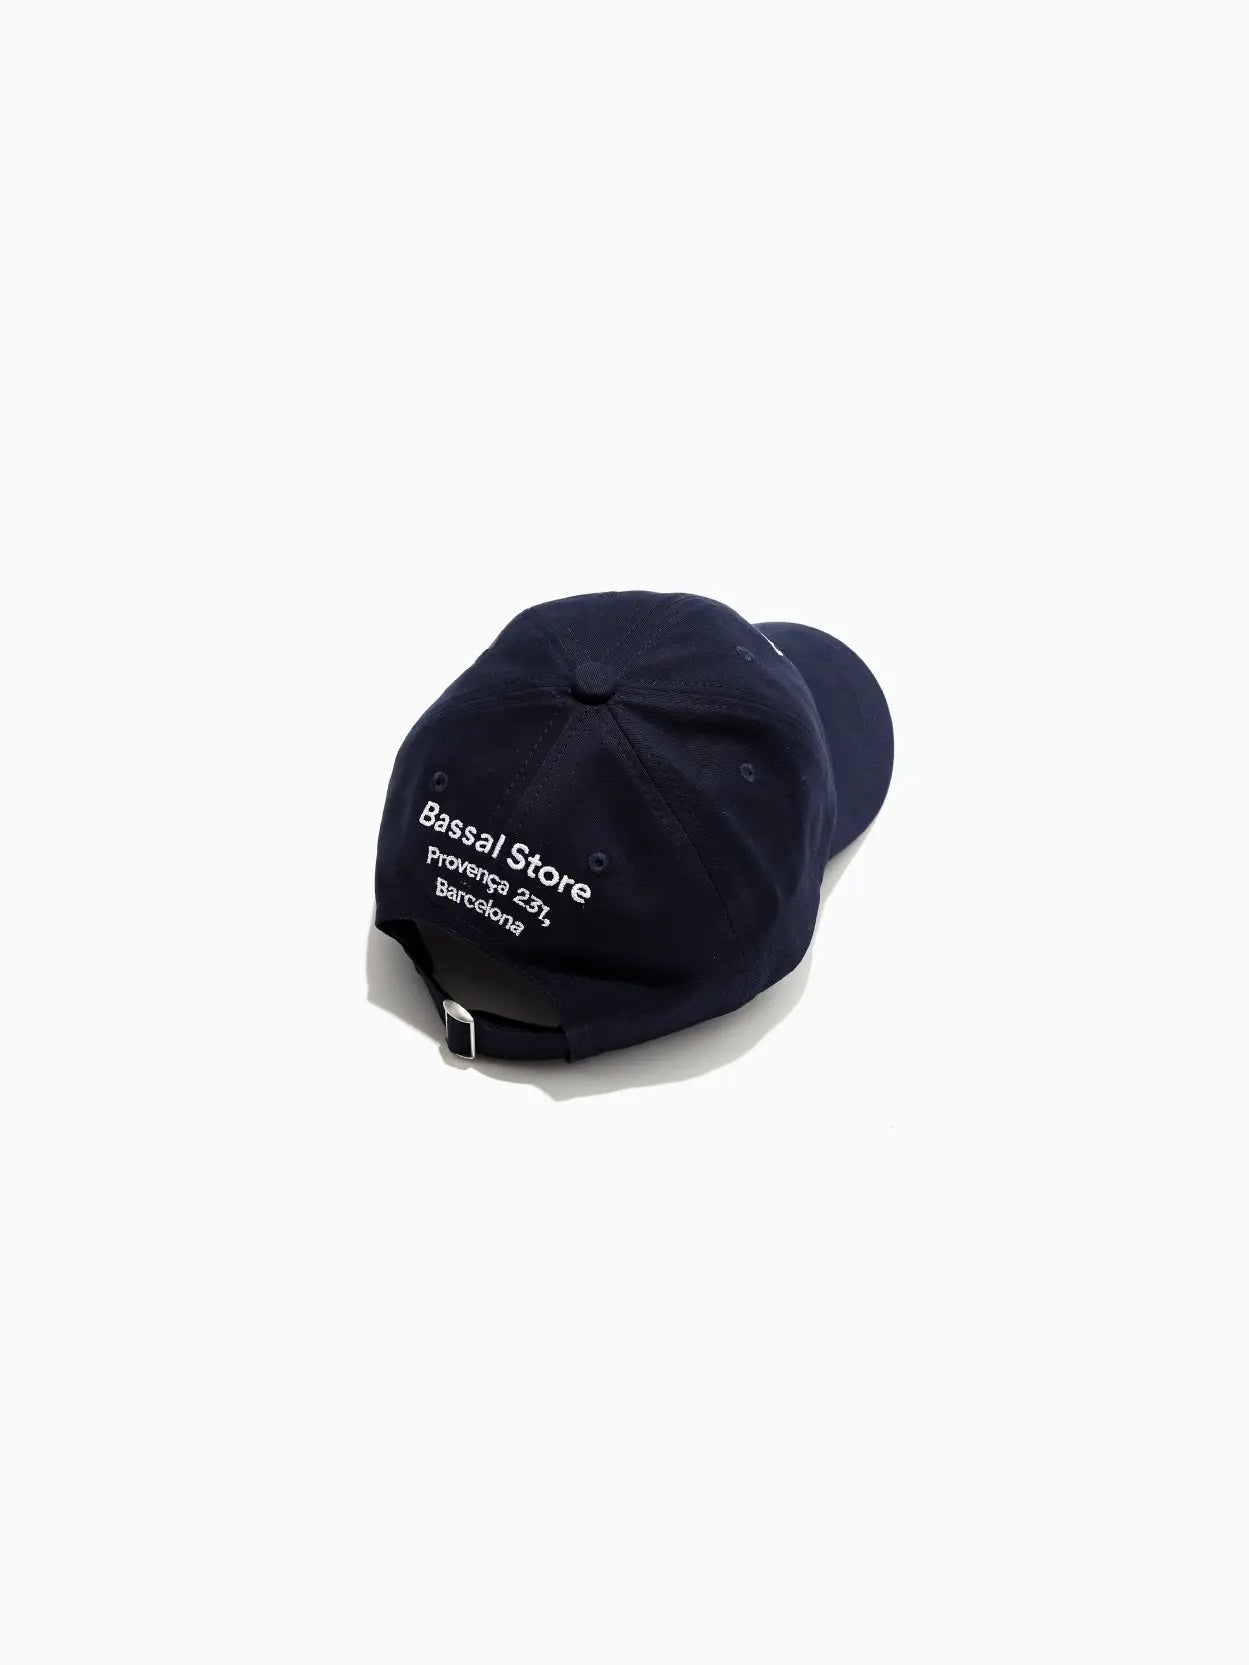 A Thank You, Come Back Cap Navy from Bassal Store with the text "Thank you, come back." embroidered in white on the front. The cap has a curved brim and six panels with stitching details. Perfect for your next visit to a bustling store in Barcelona.